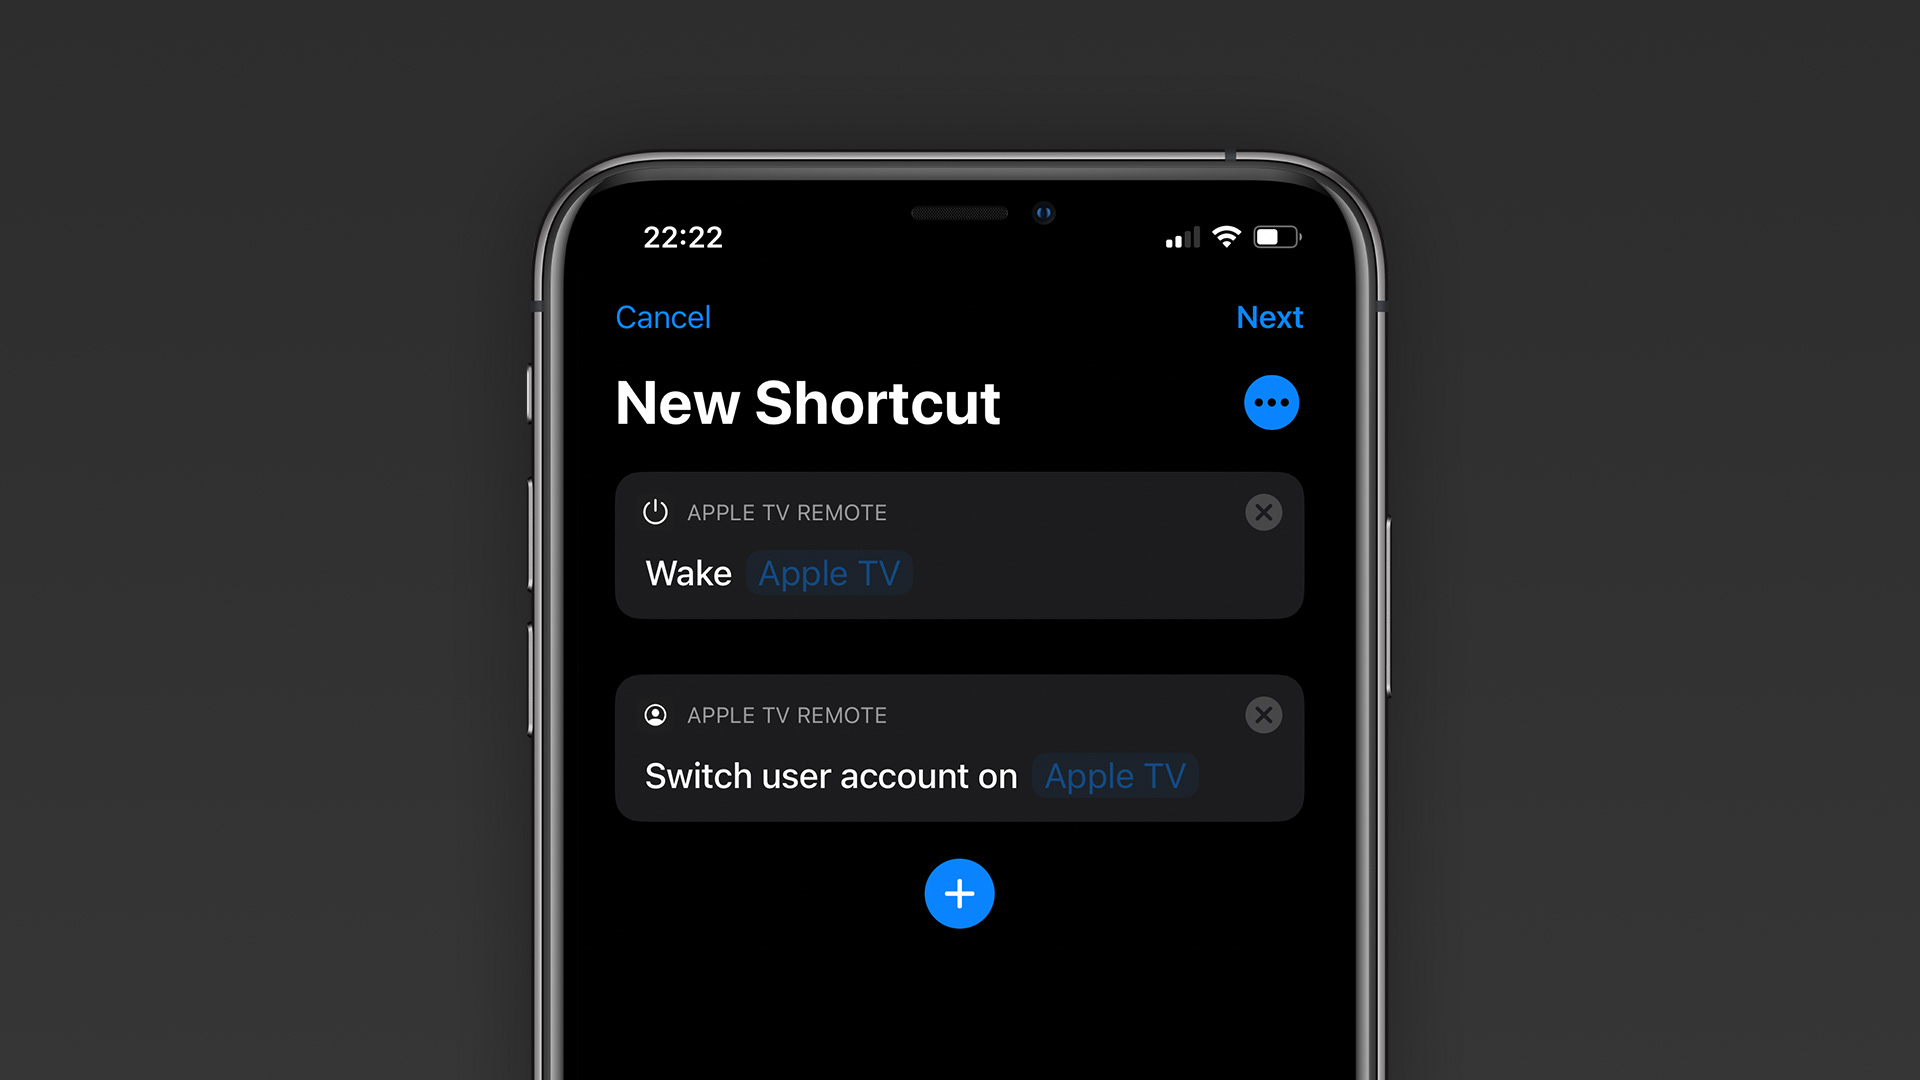 Users can now create Shortcuts to switch accounts on Apple TV with iOS 14 and tvOS 14 thumbnail